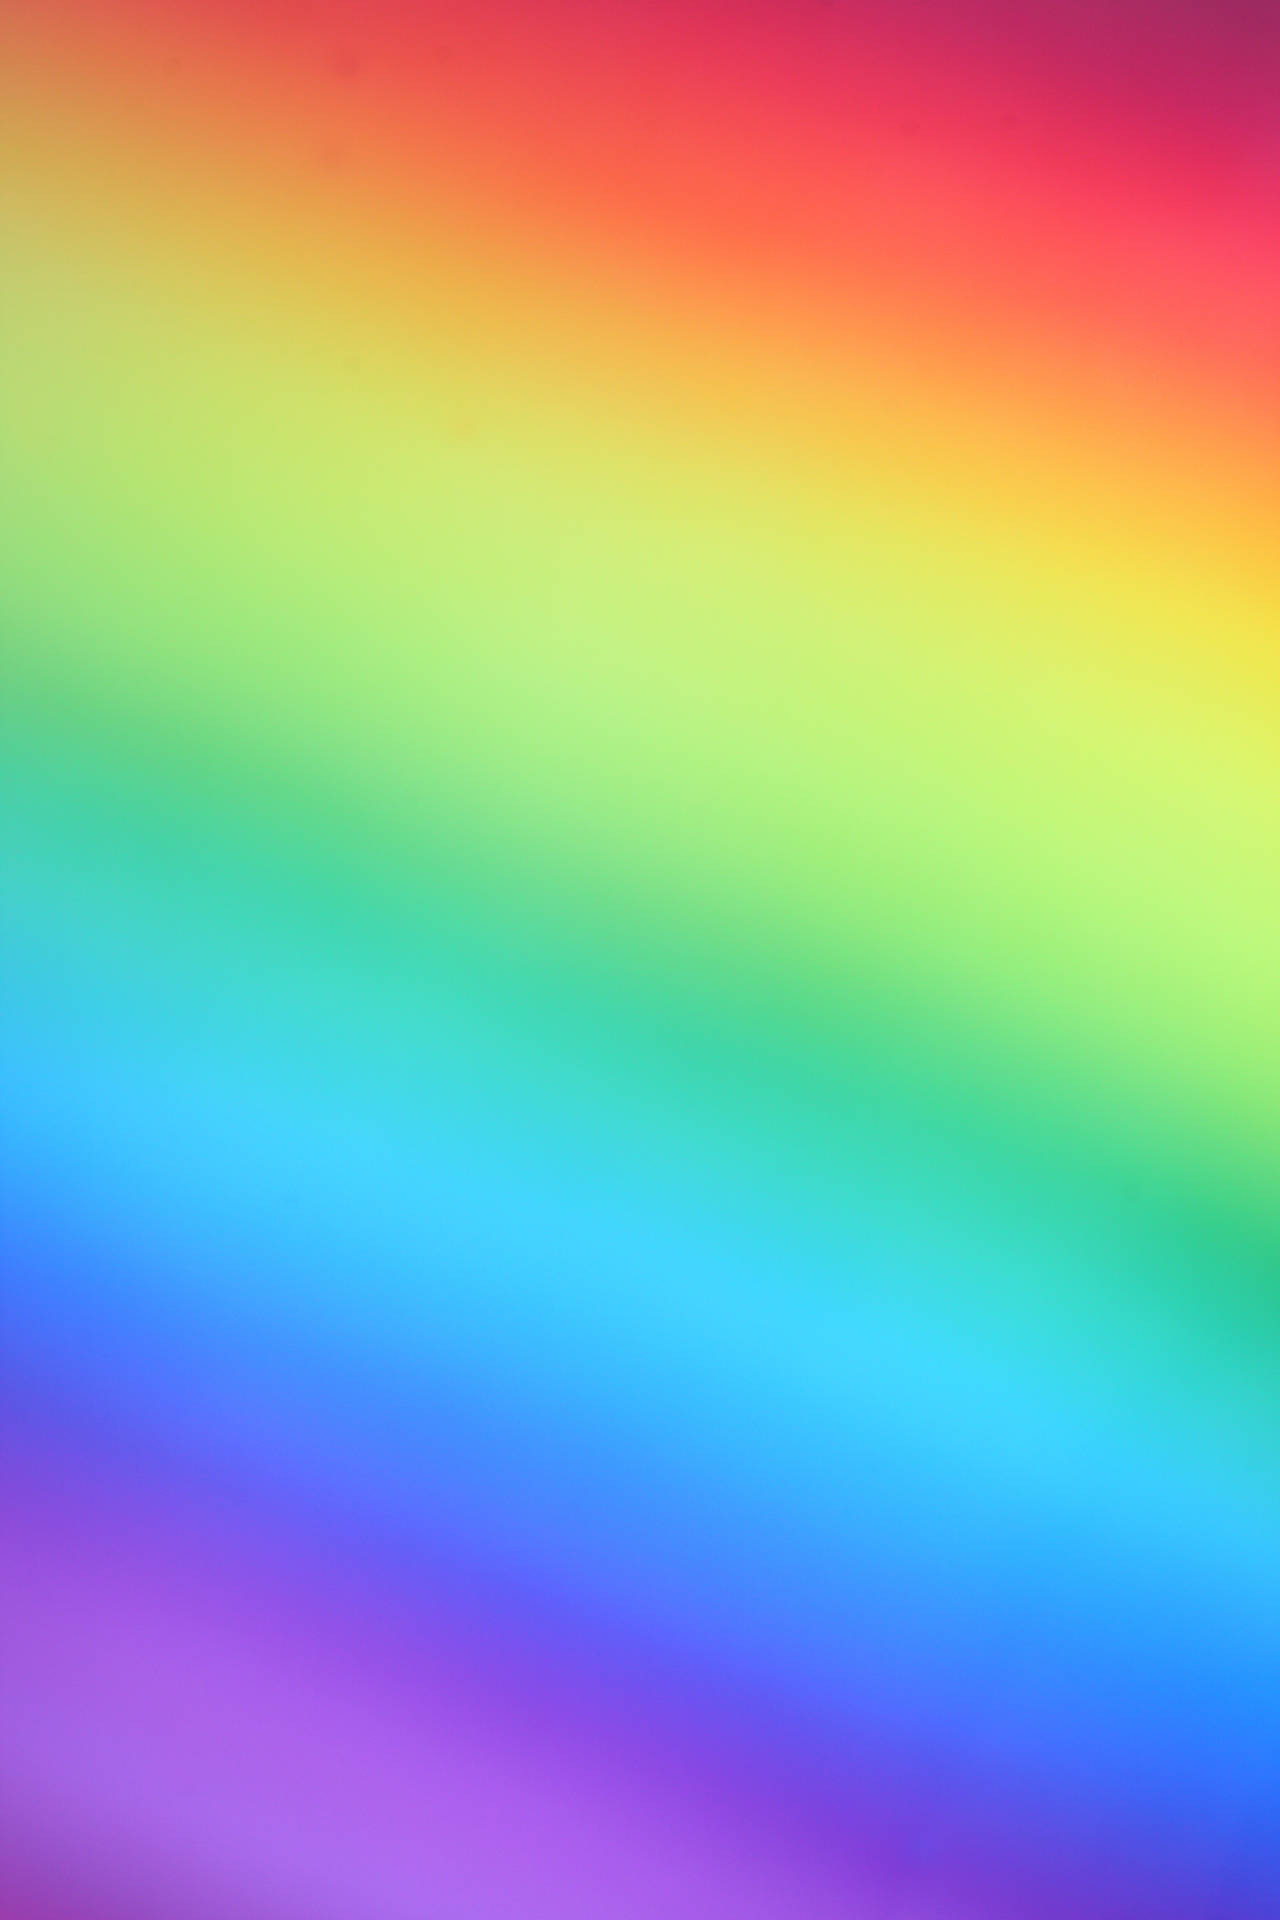 Holographic iridescent reflective rainbow background for social media  posts, banners and websites. Gradient colors. Square composition. Stock  Illustration